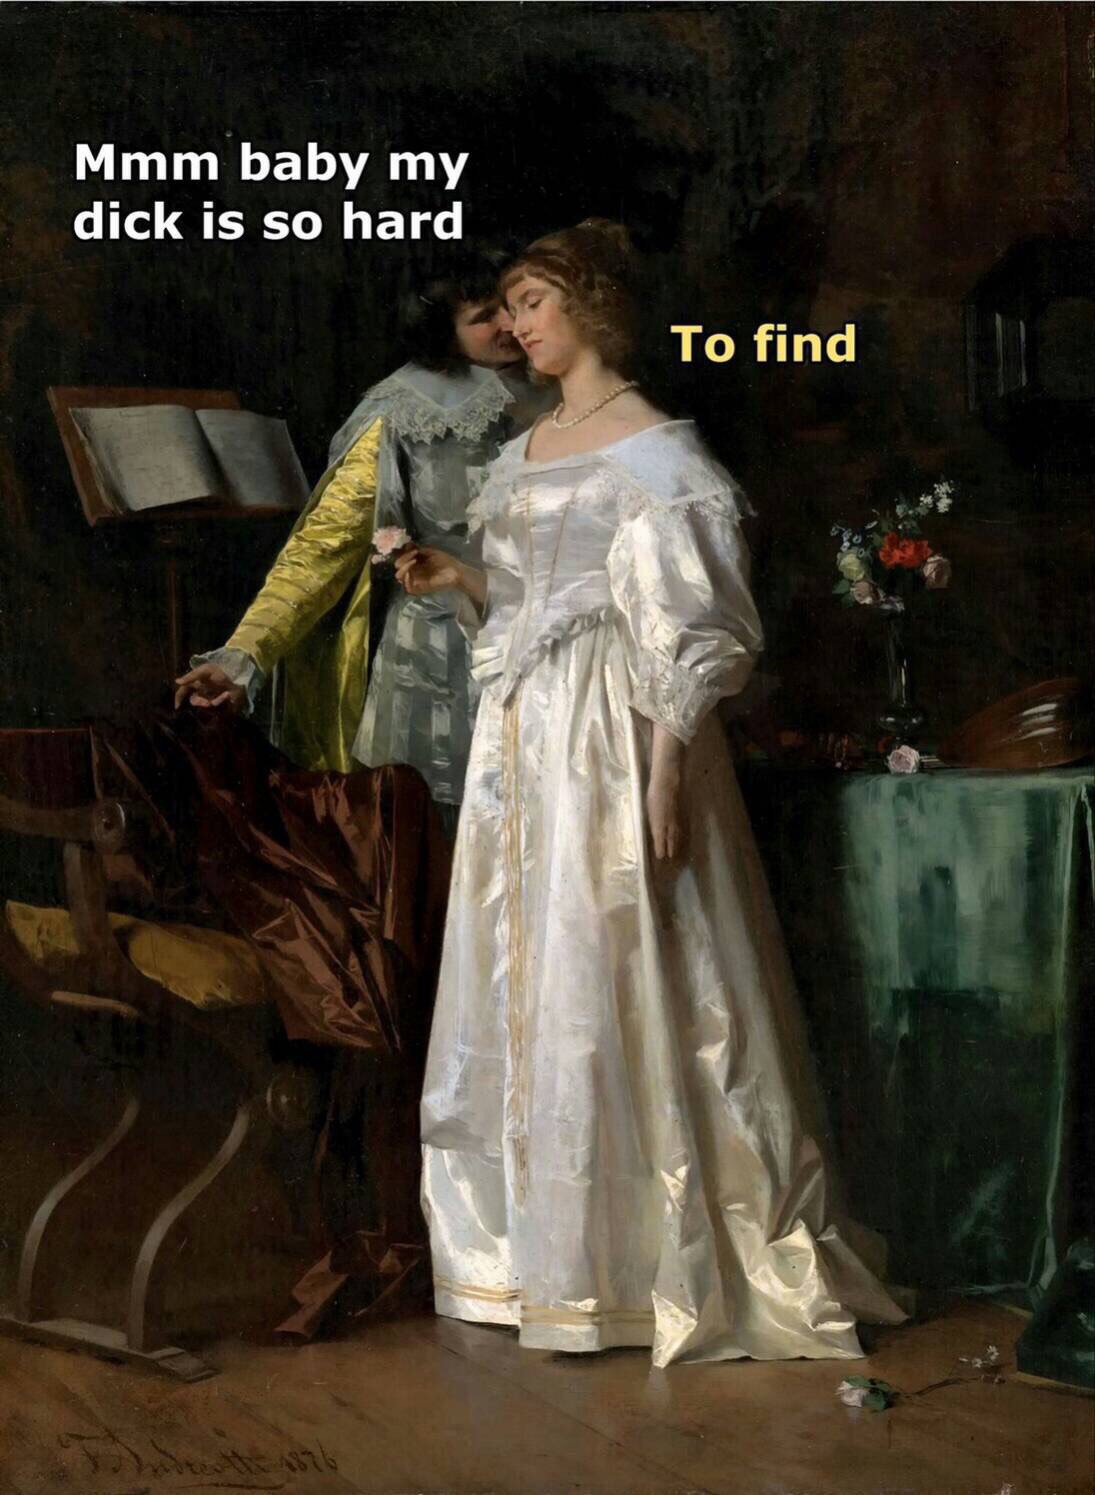 victorian art meme - Mmm baby my dick is so hard To find